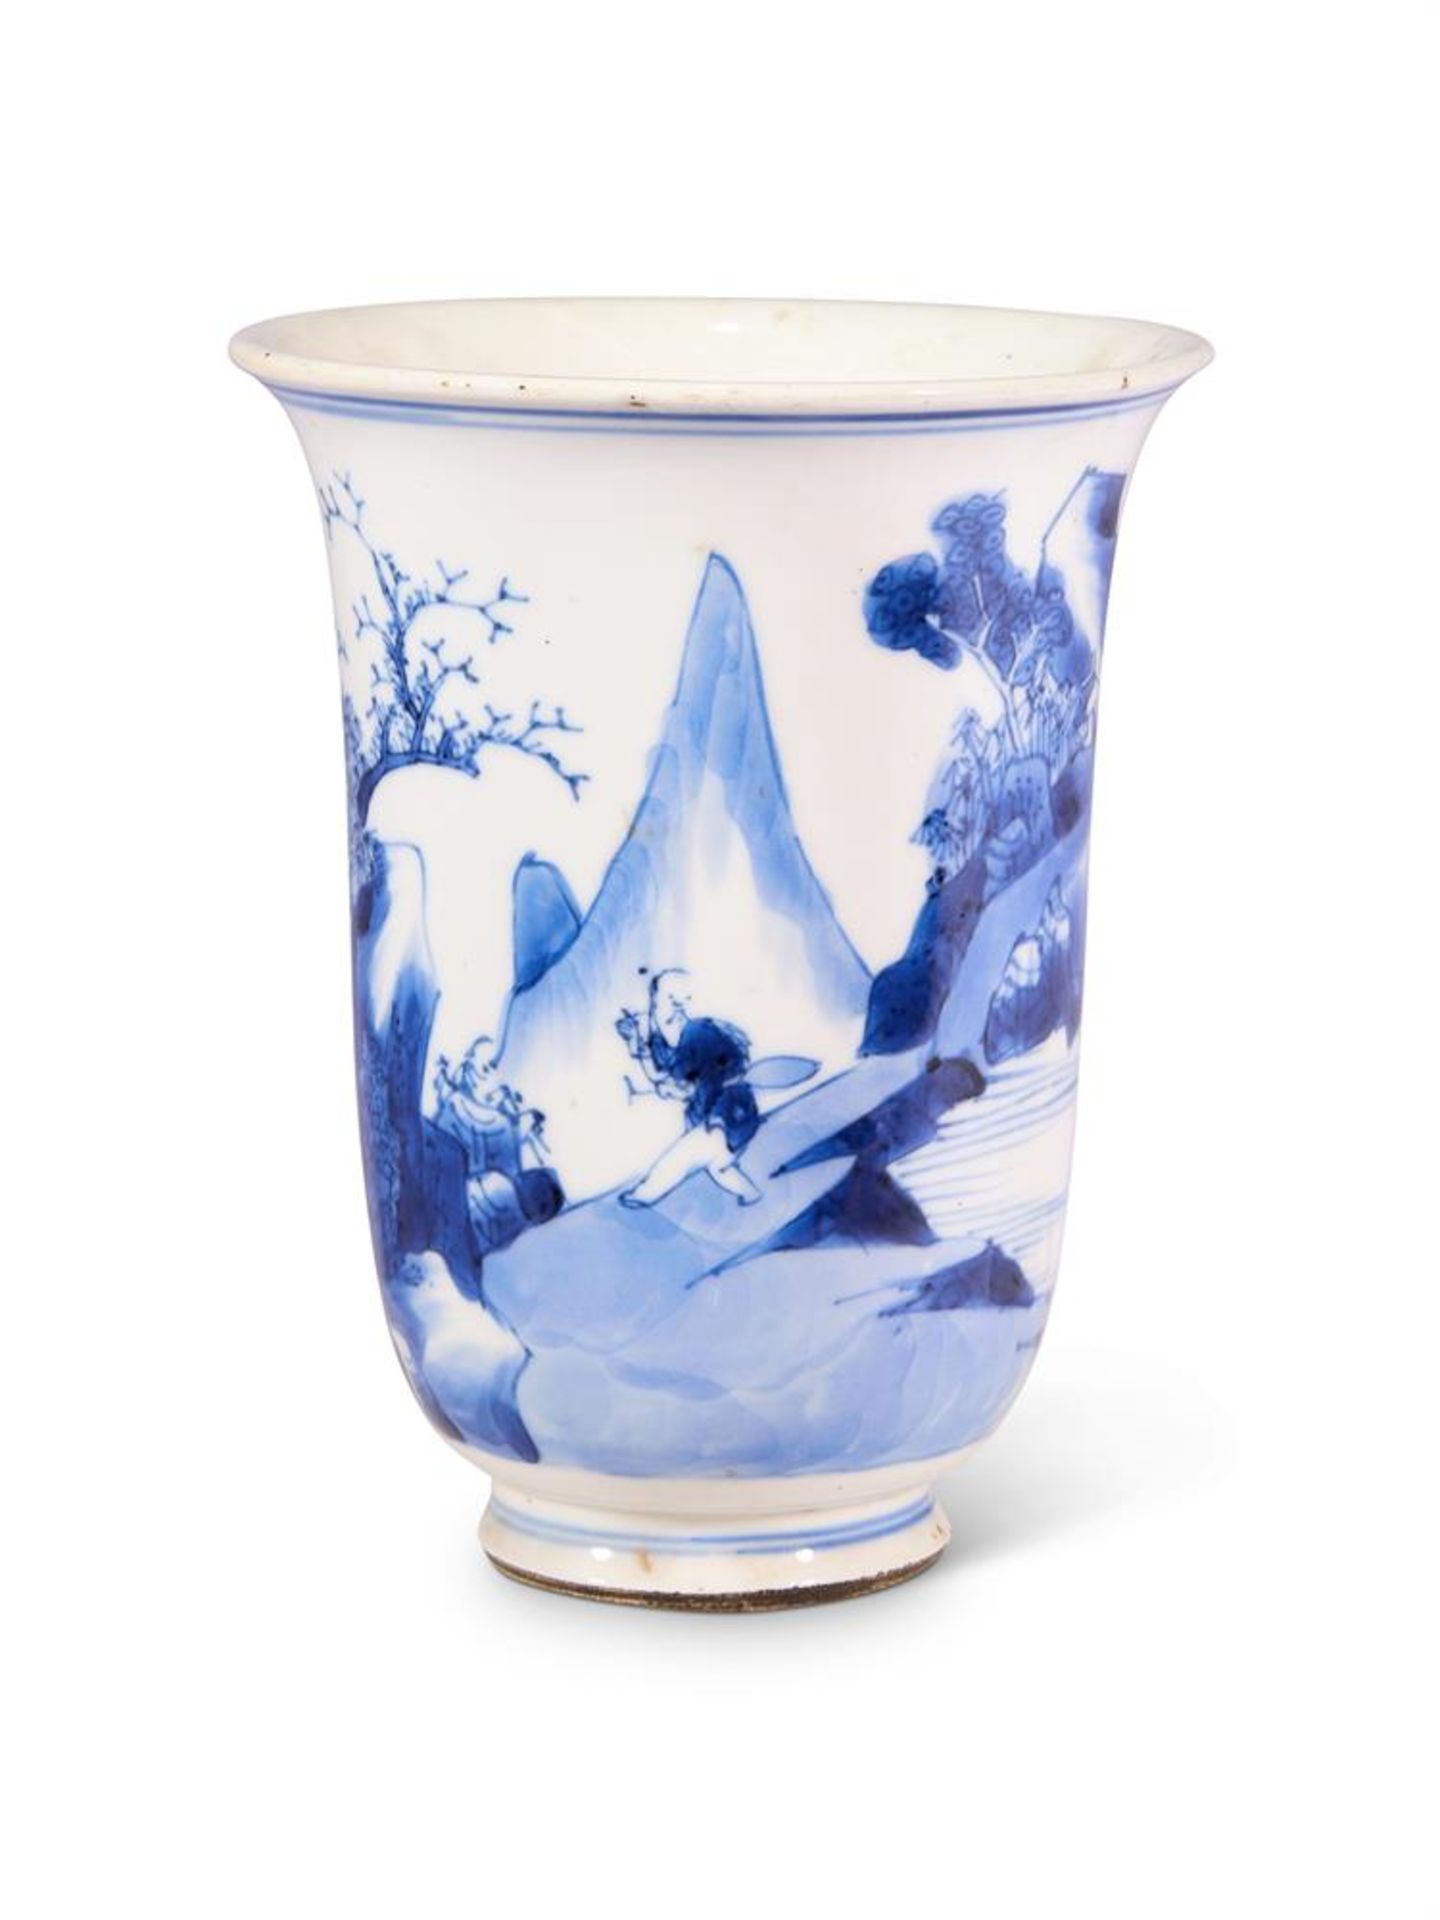 A CHINESE BLUE AND WHITE PORCELAIN BEAKER, QING DYNASTY